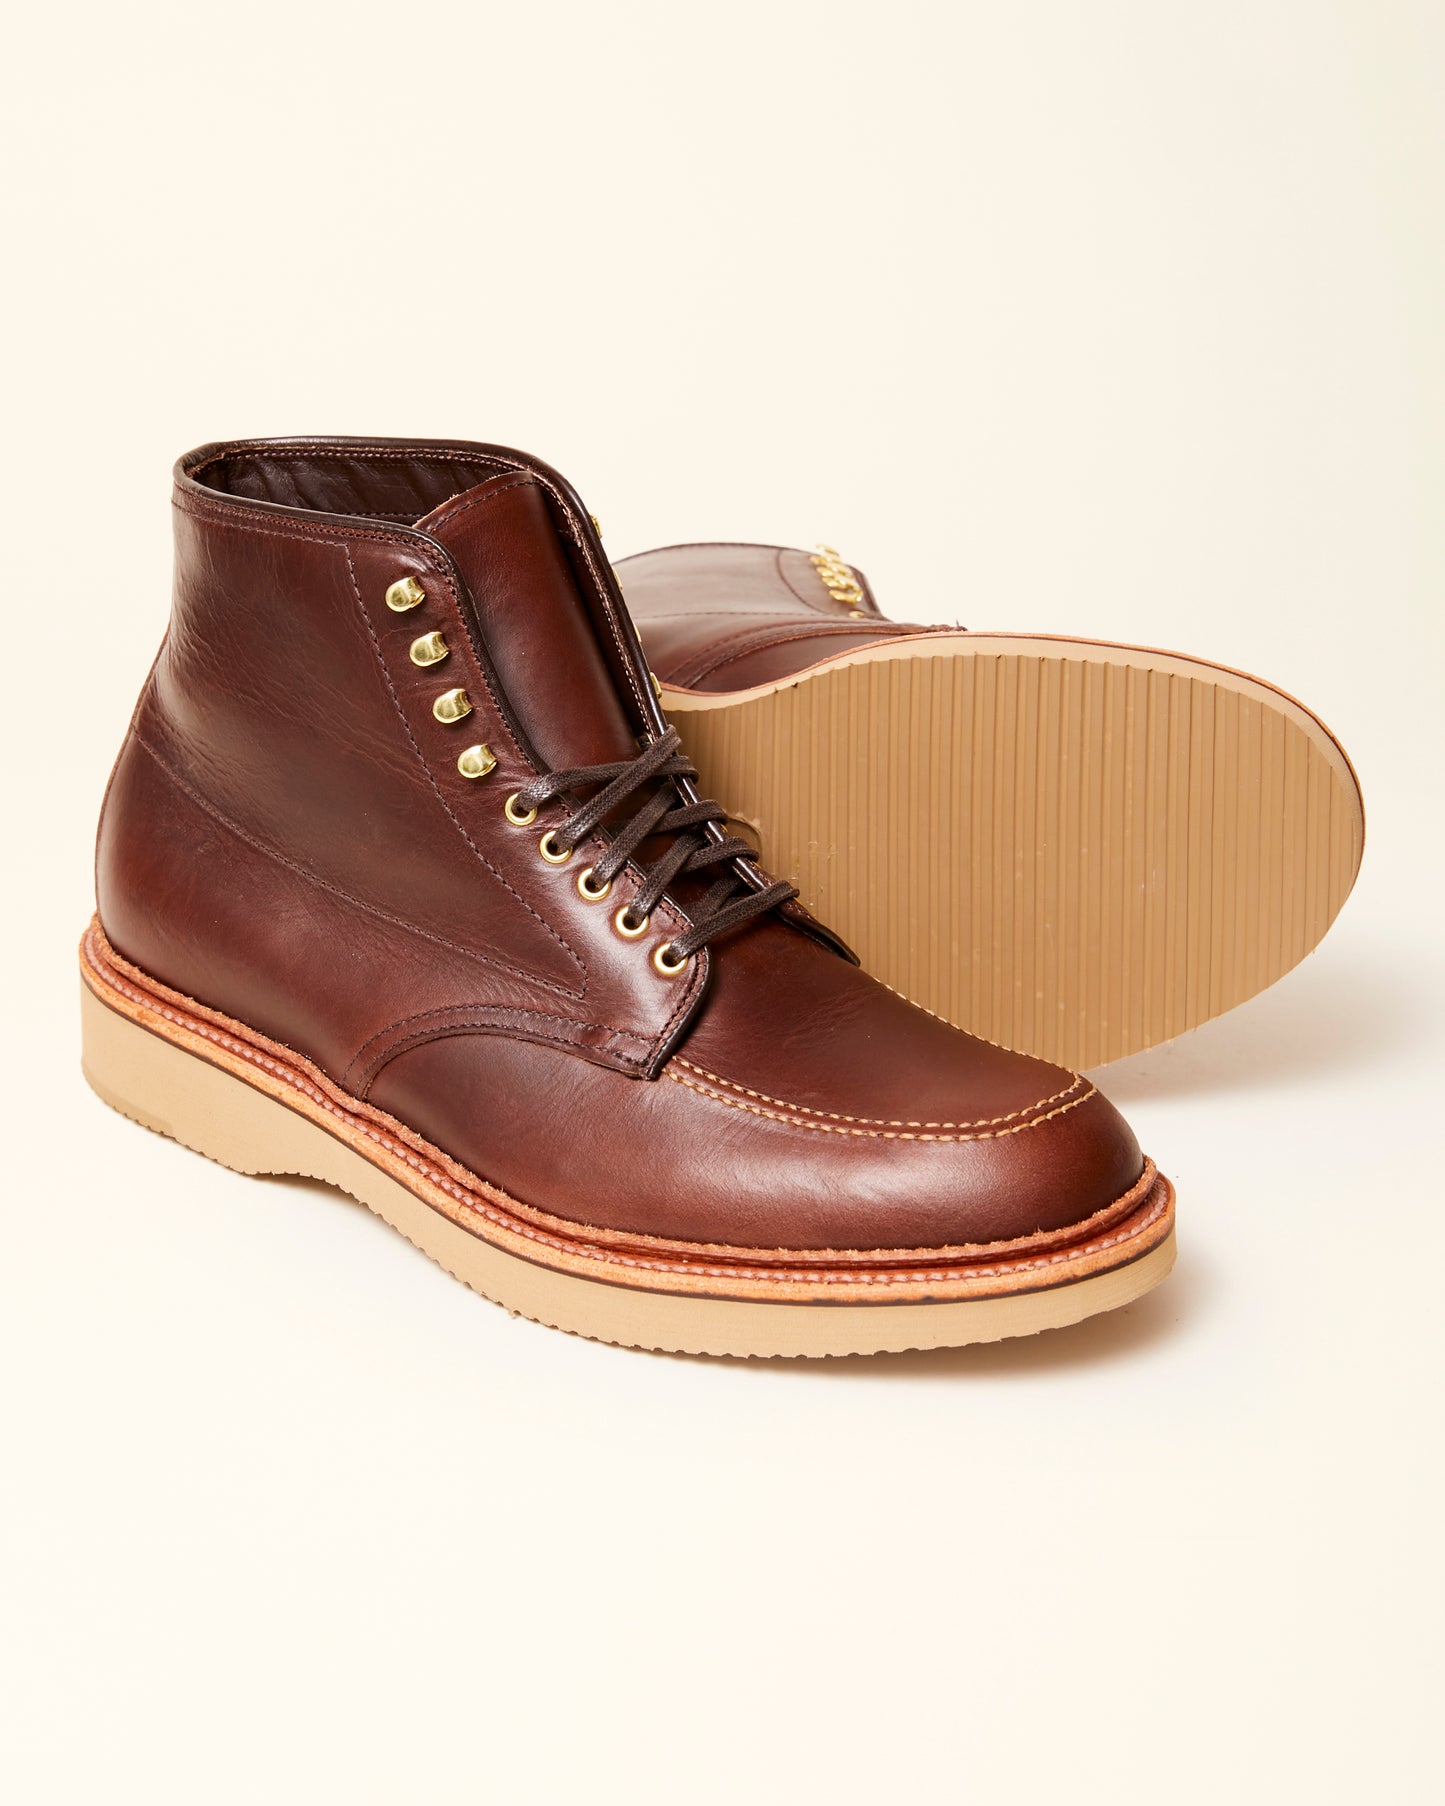 "Olympic" Indy Boot in Brown Chromexcel, Trubalance Last